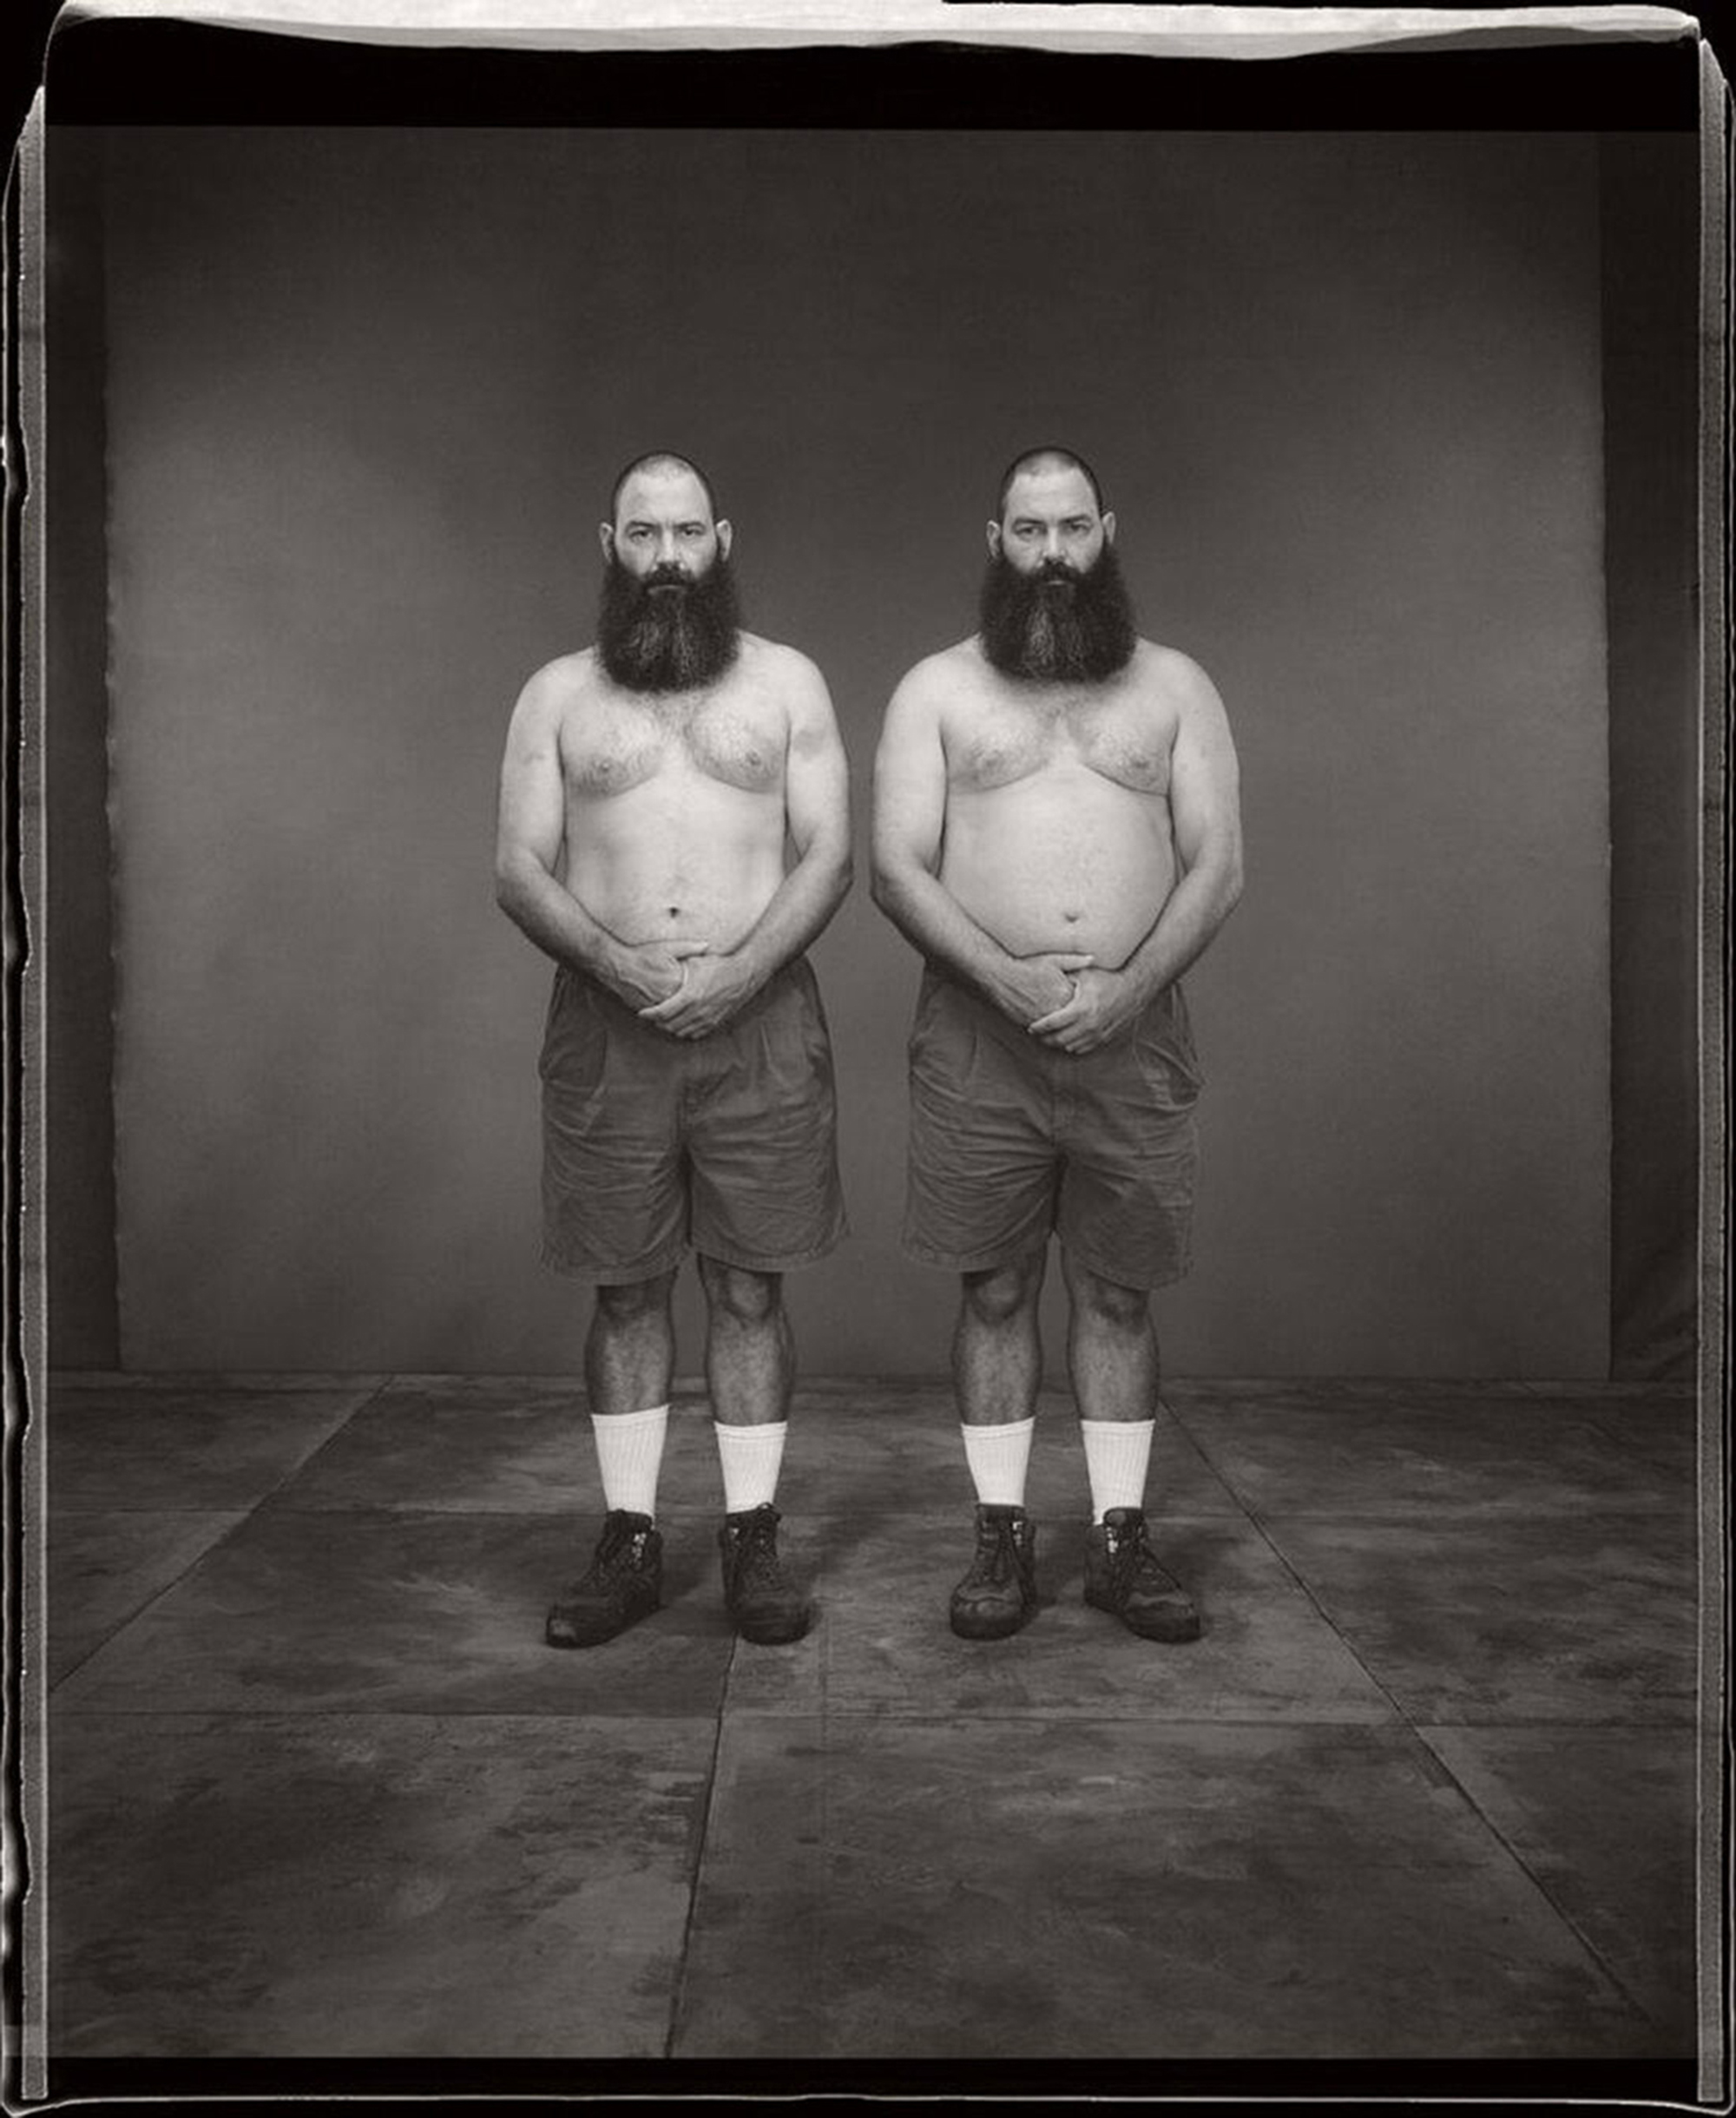 Don and Dave Wolf © Mary Ellen Mark, Ohio, 2001